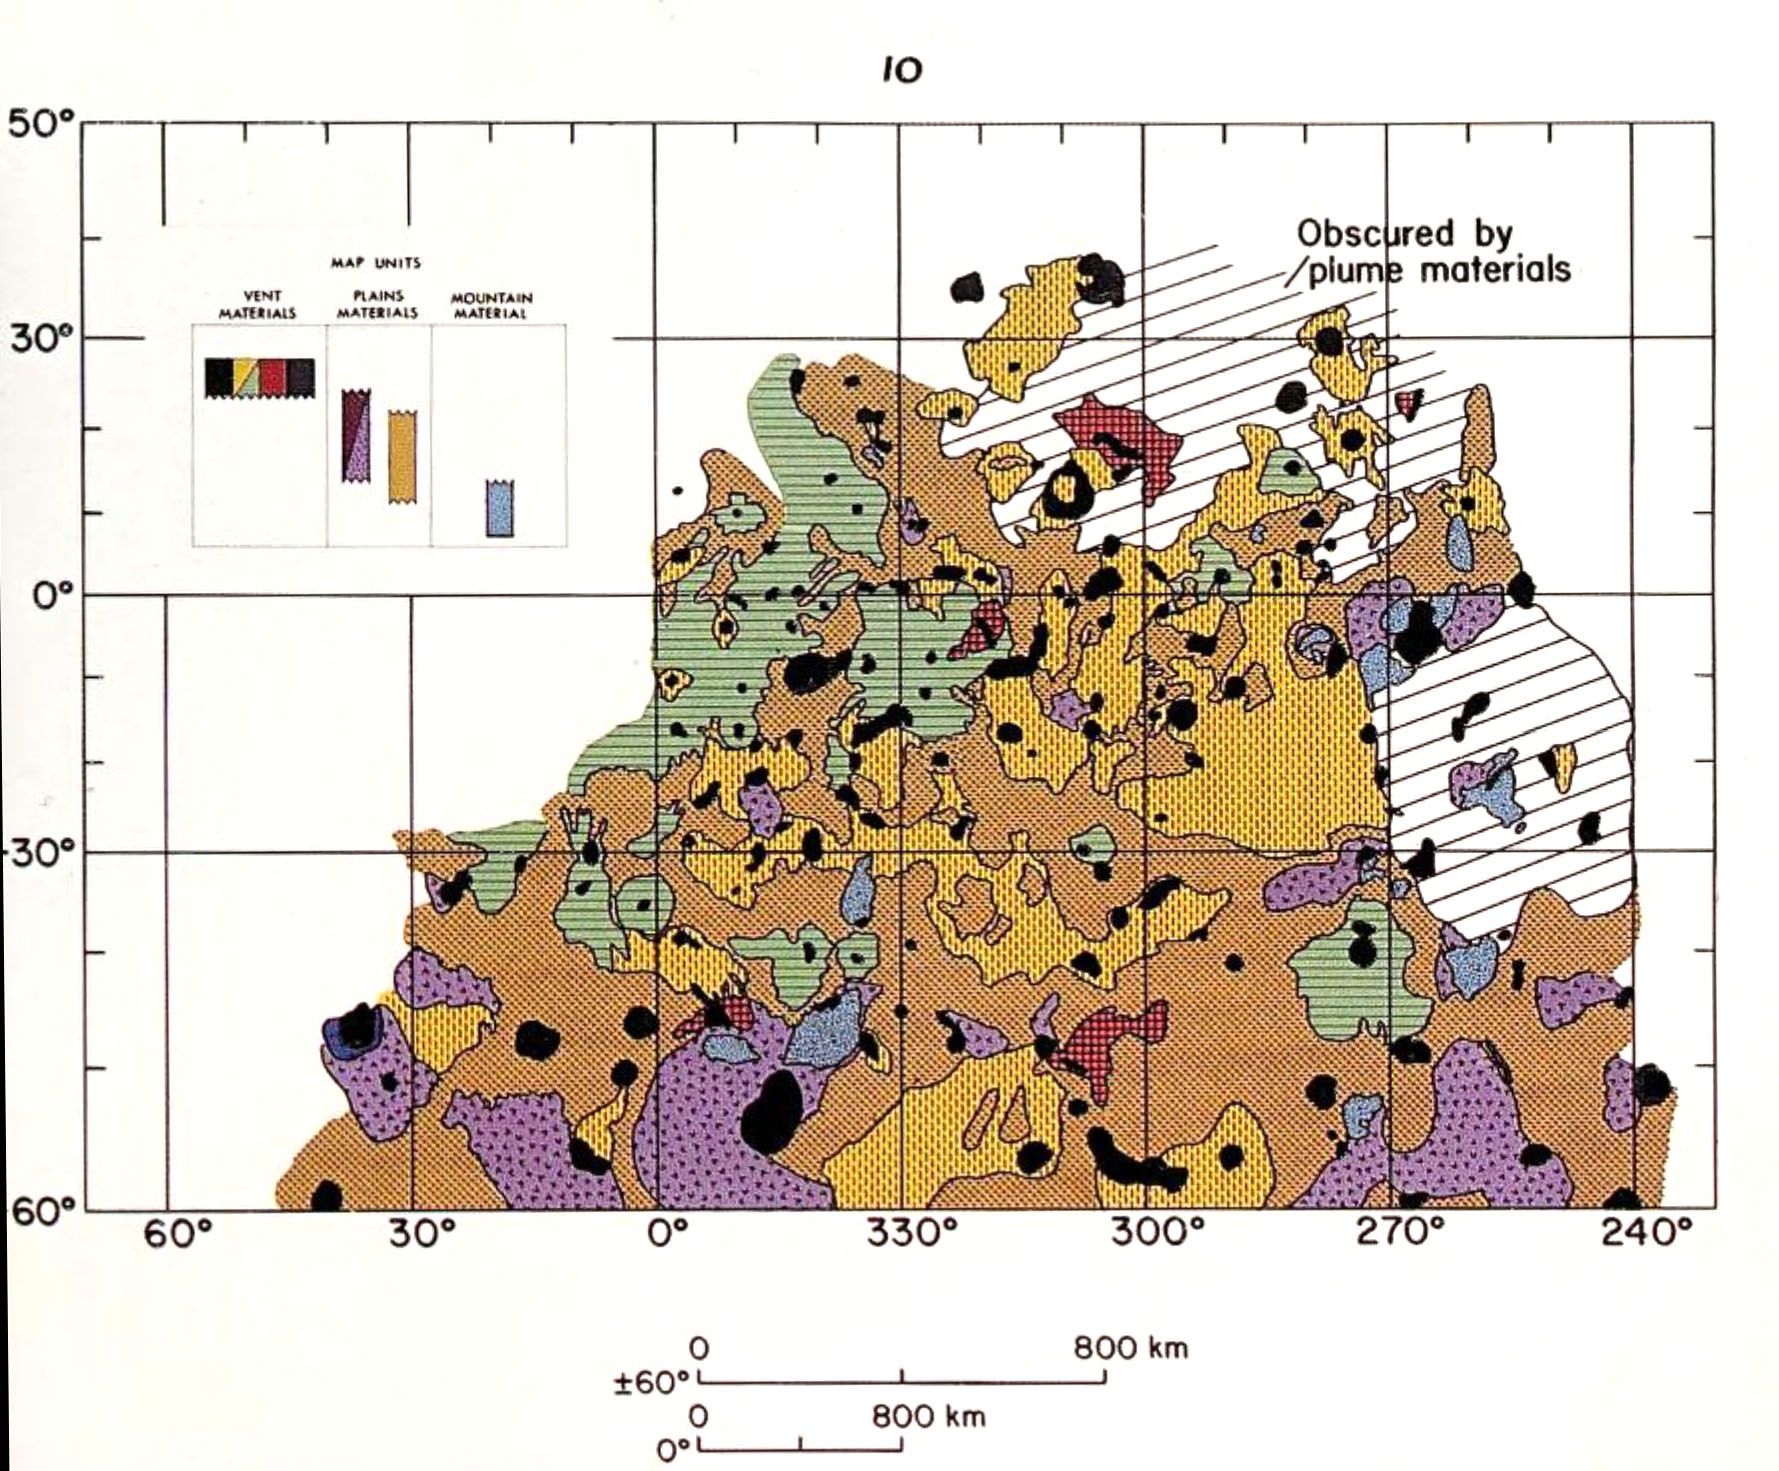 The first geologic map of Io